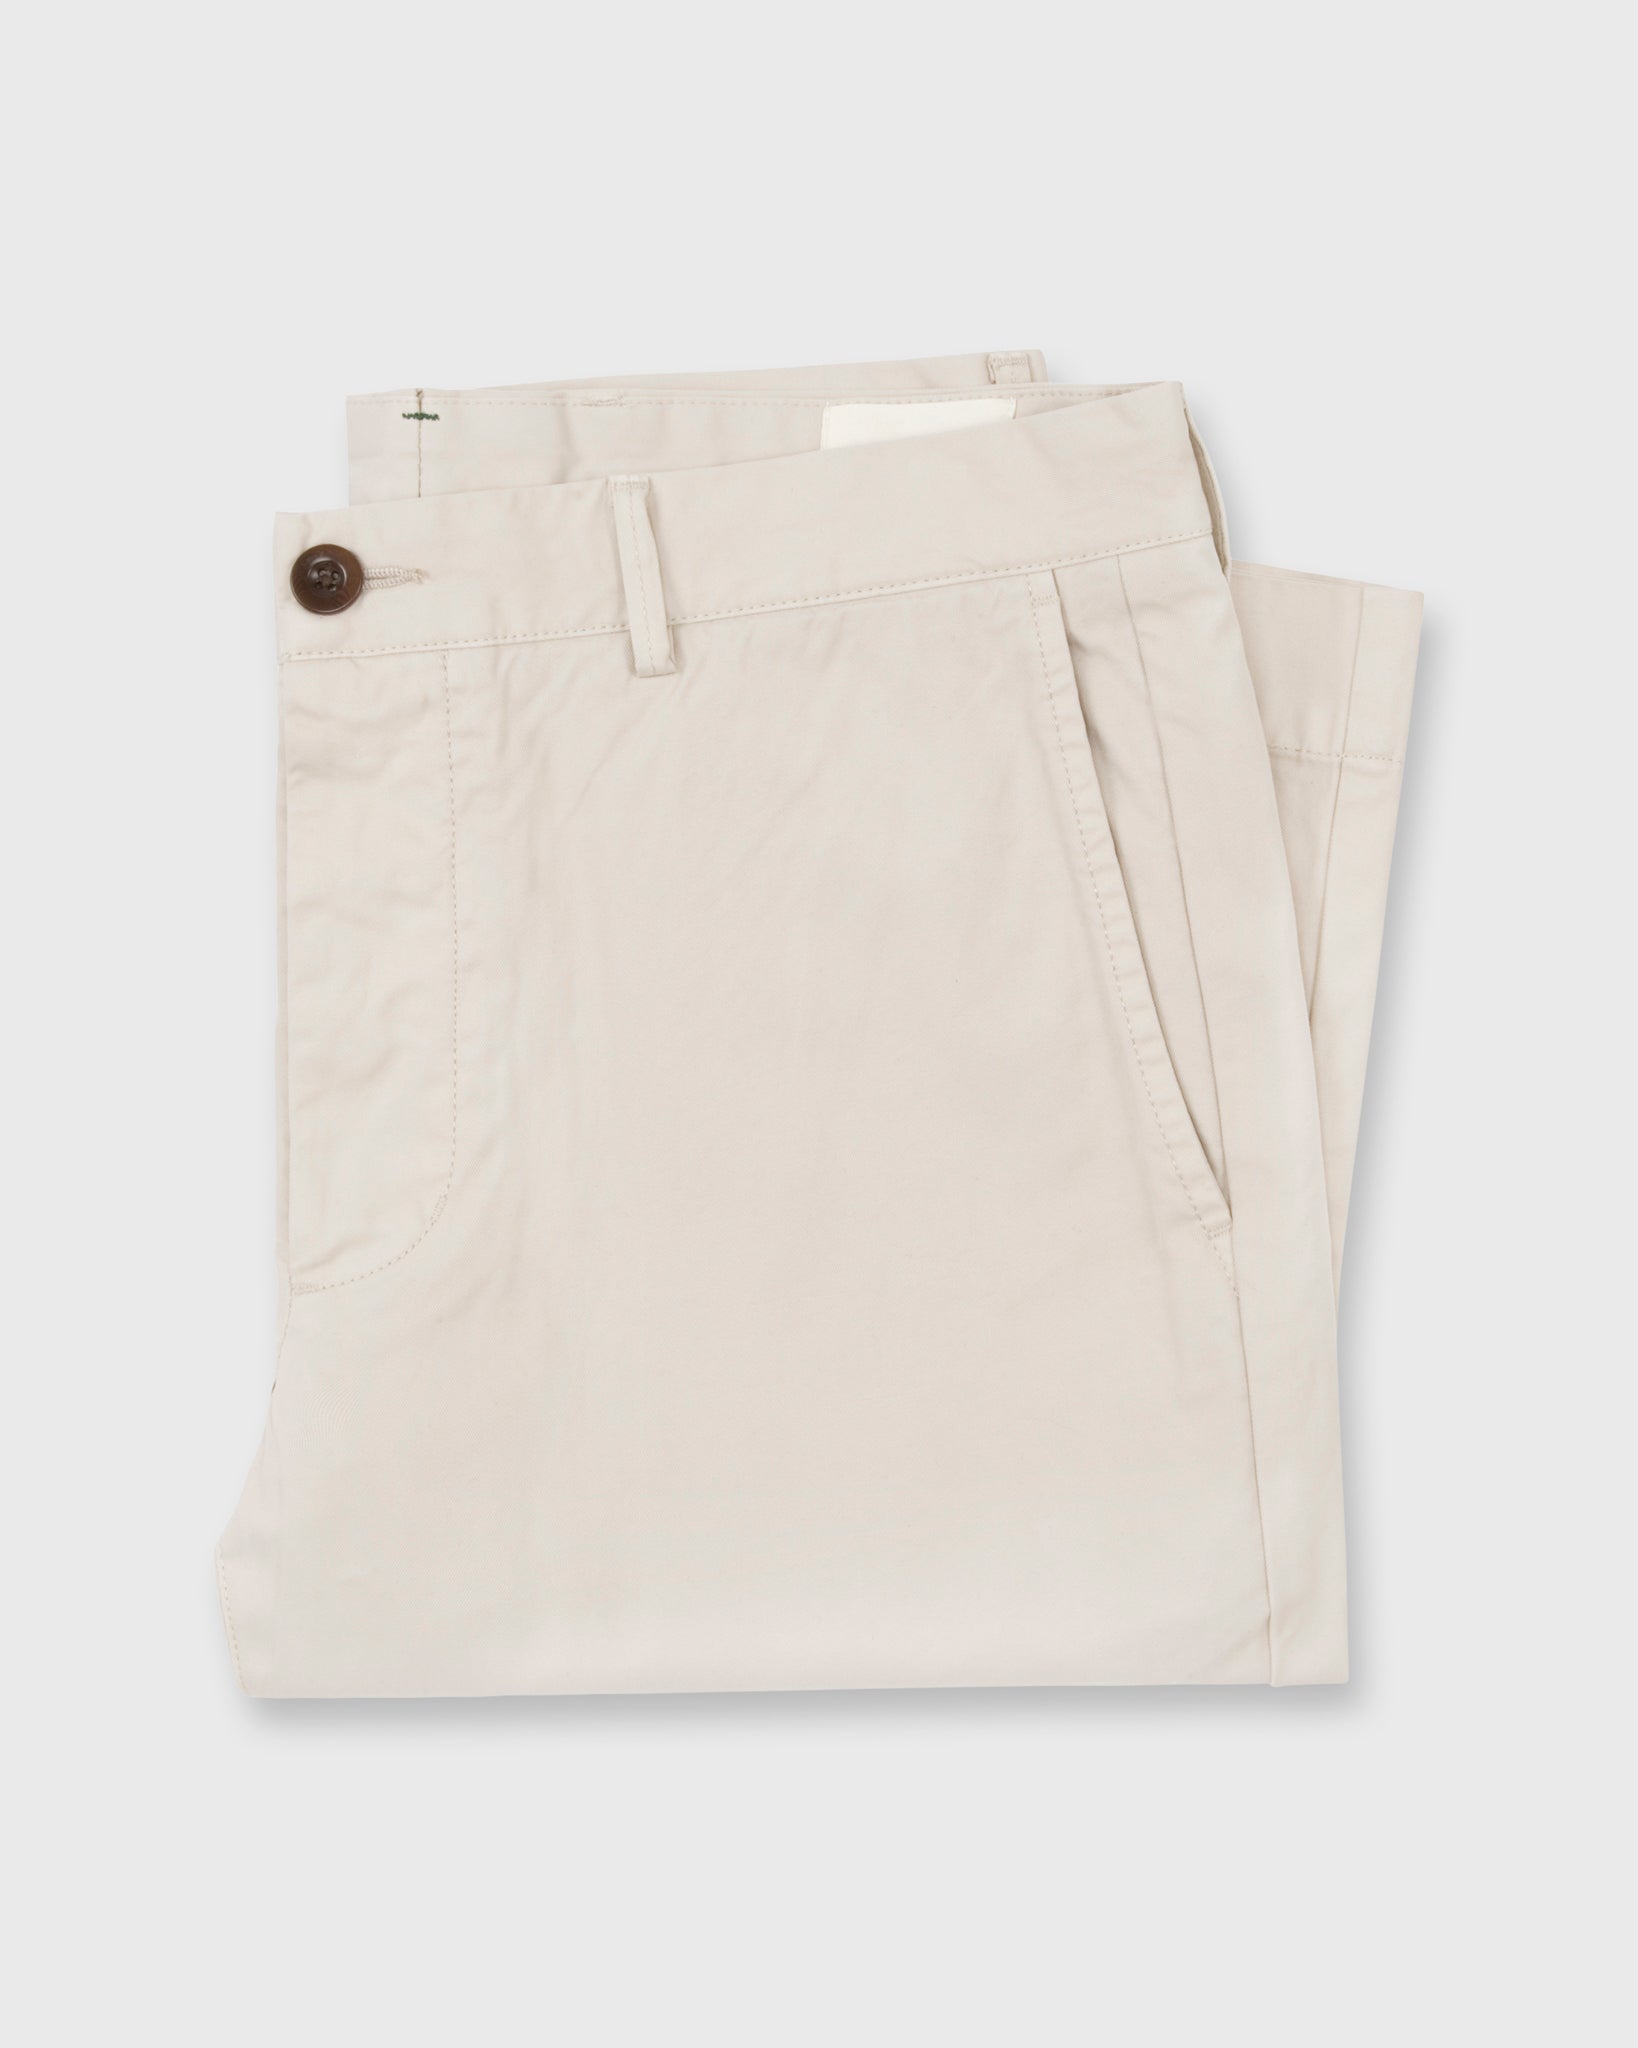 Garment-Dyed Field Pant in Stone AP Lightweight Twill